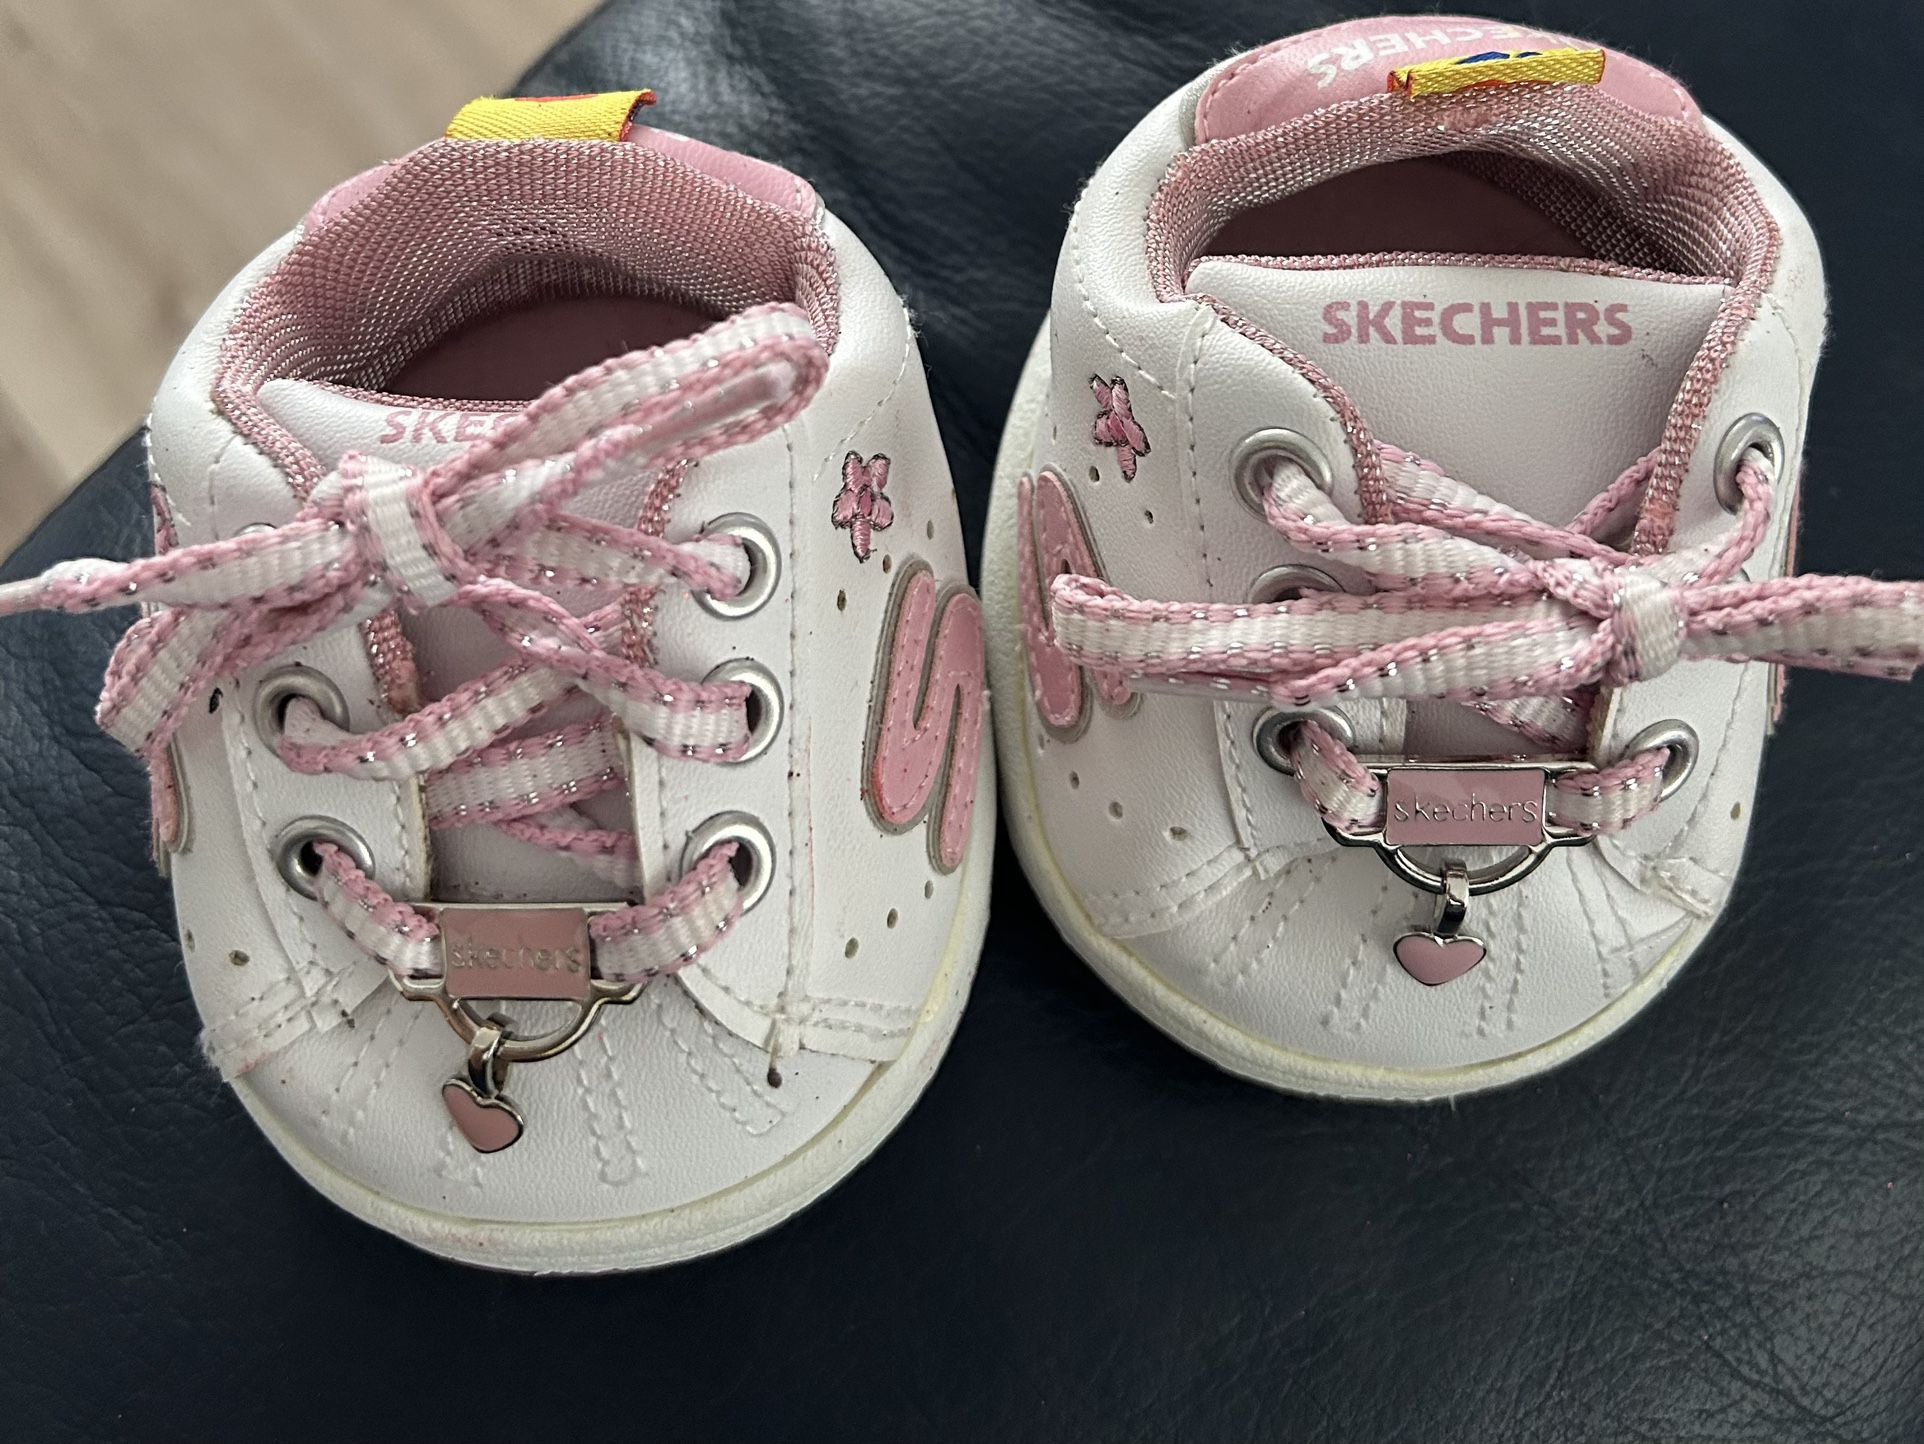 Build-a-Bear Skechers Sneakers Shoes w/ Heart Charm Pink & White